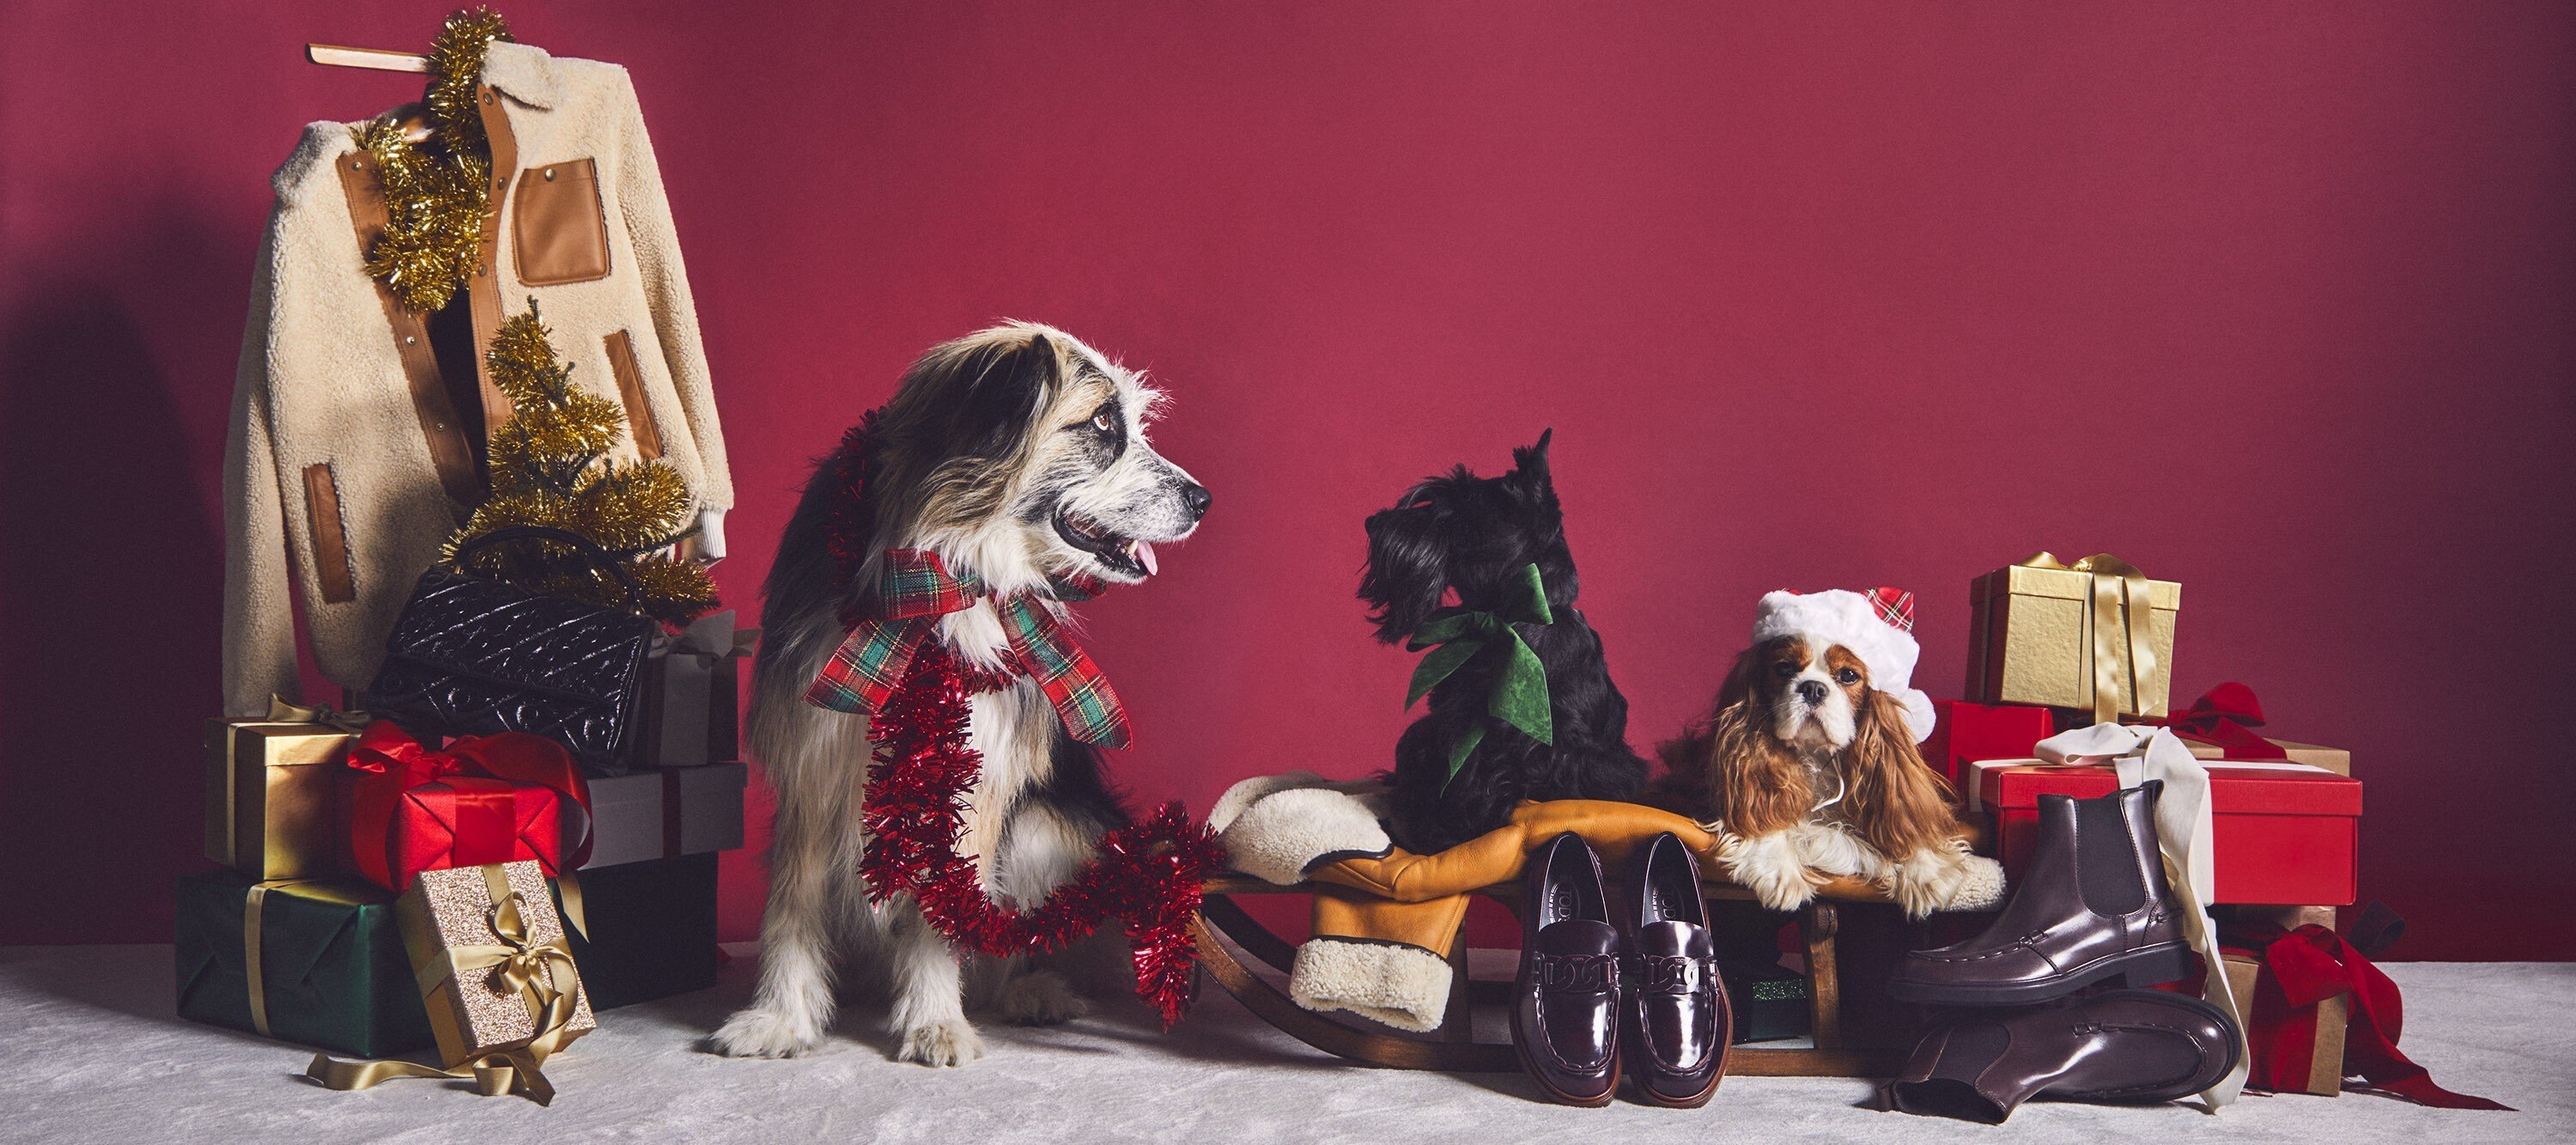 China’s dog owners are increasingly likely to spend money on special gifts and products for their pets. Photo: Tod's